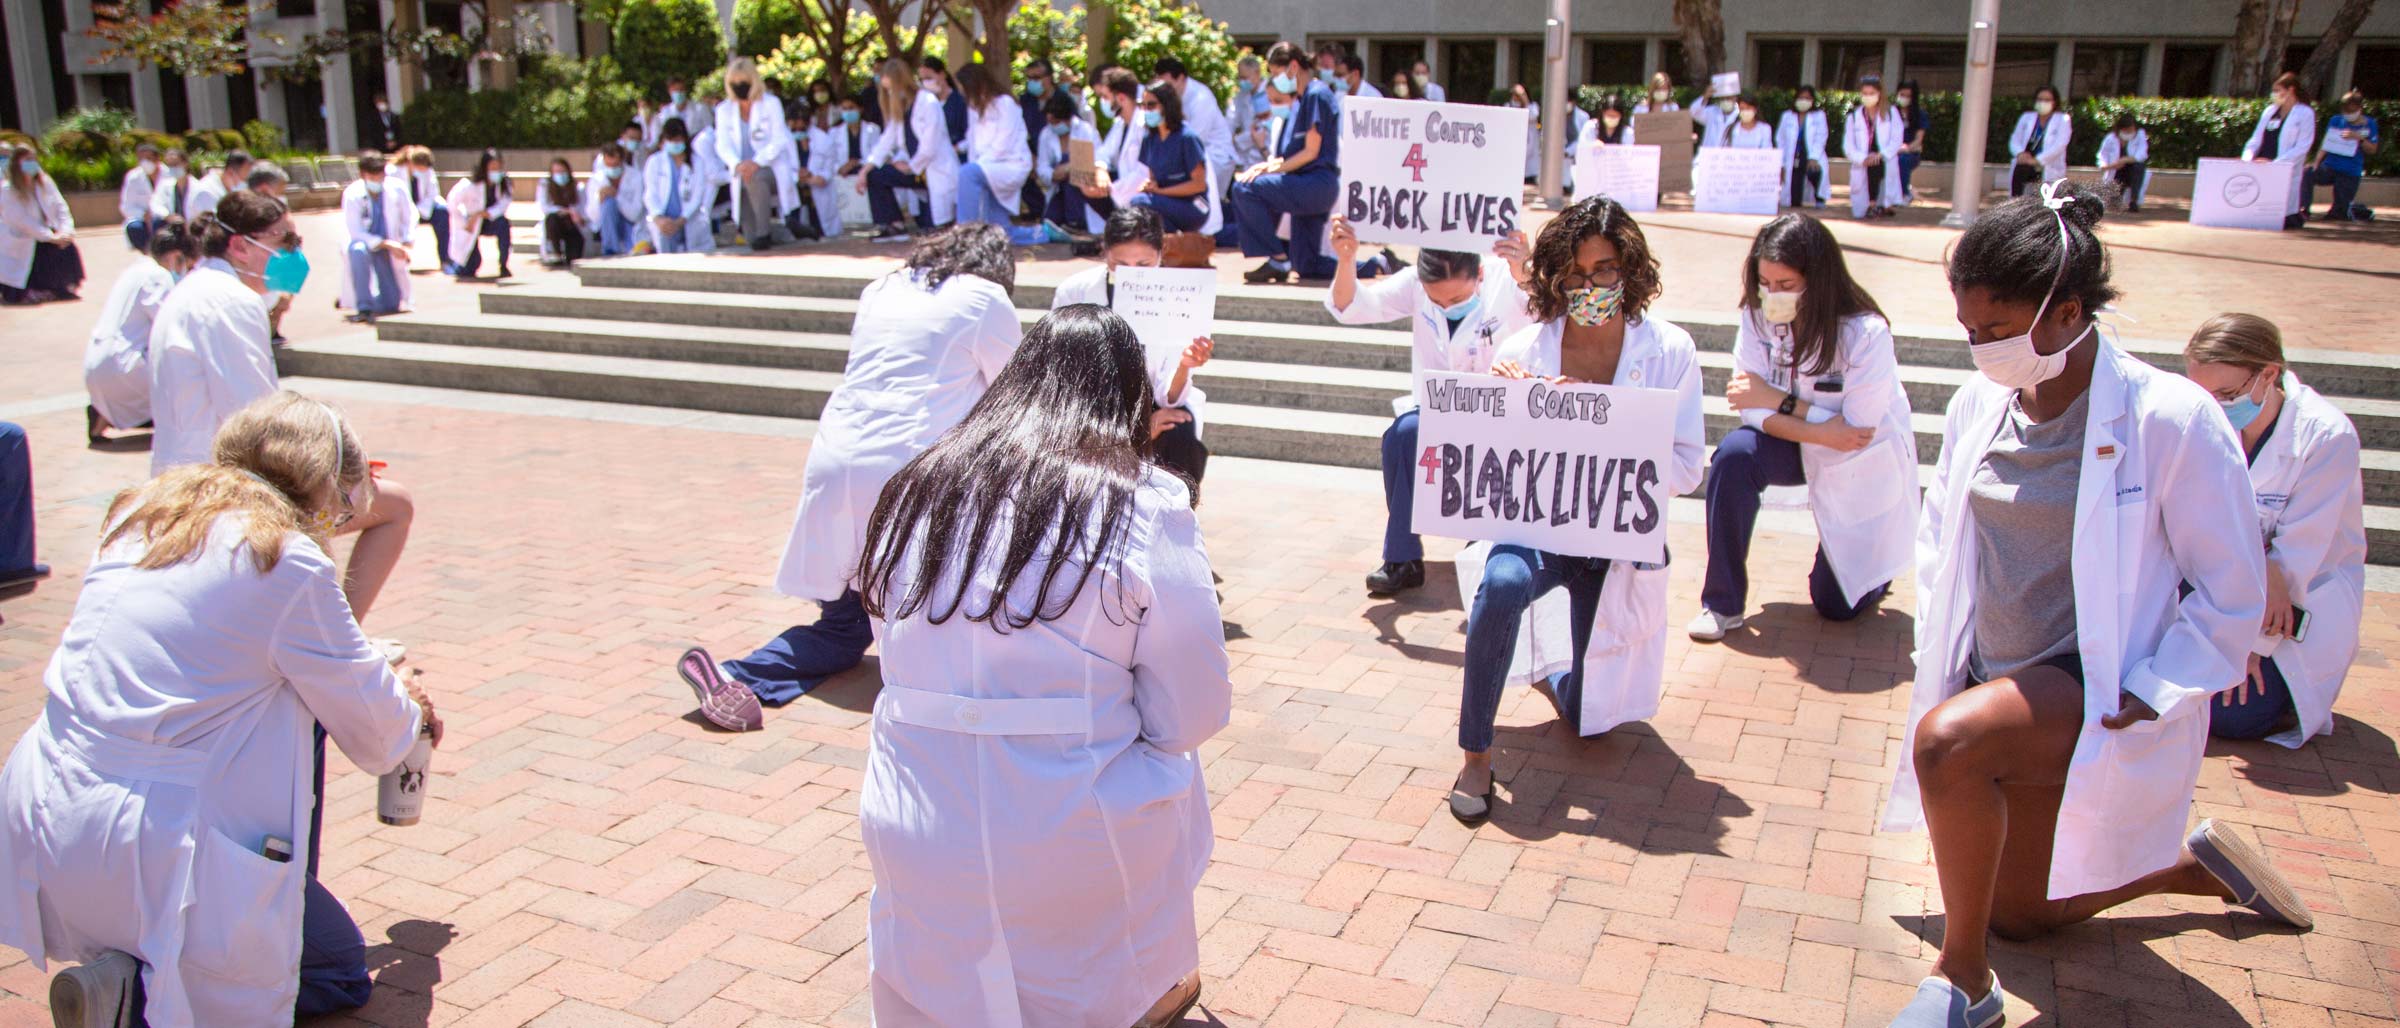 Crowd of people kneeling, wearing white lab coats and holding signs